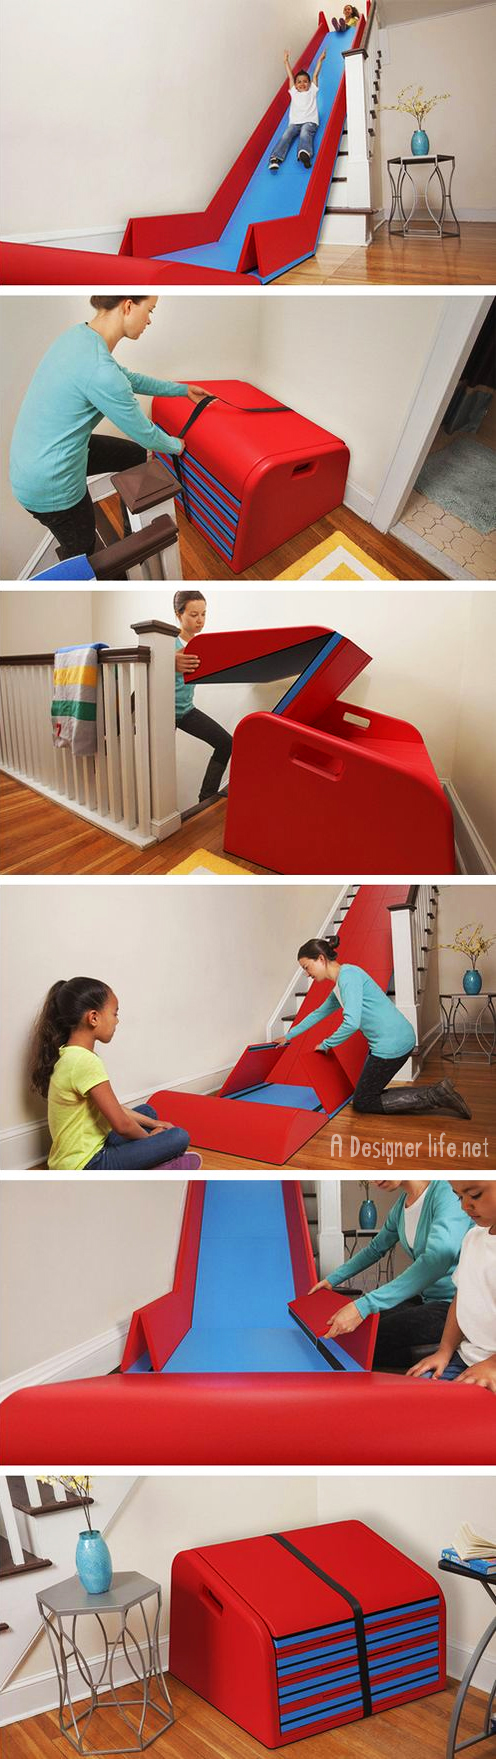 Need this in my house! A stair slide that converts your staircase into a slippery dip! #product_design